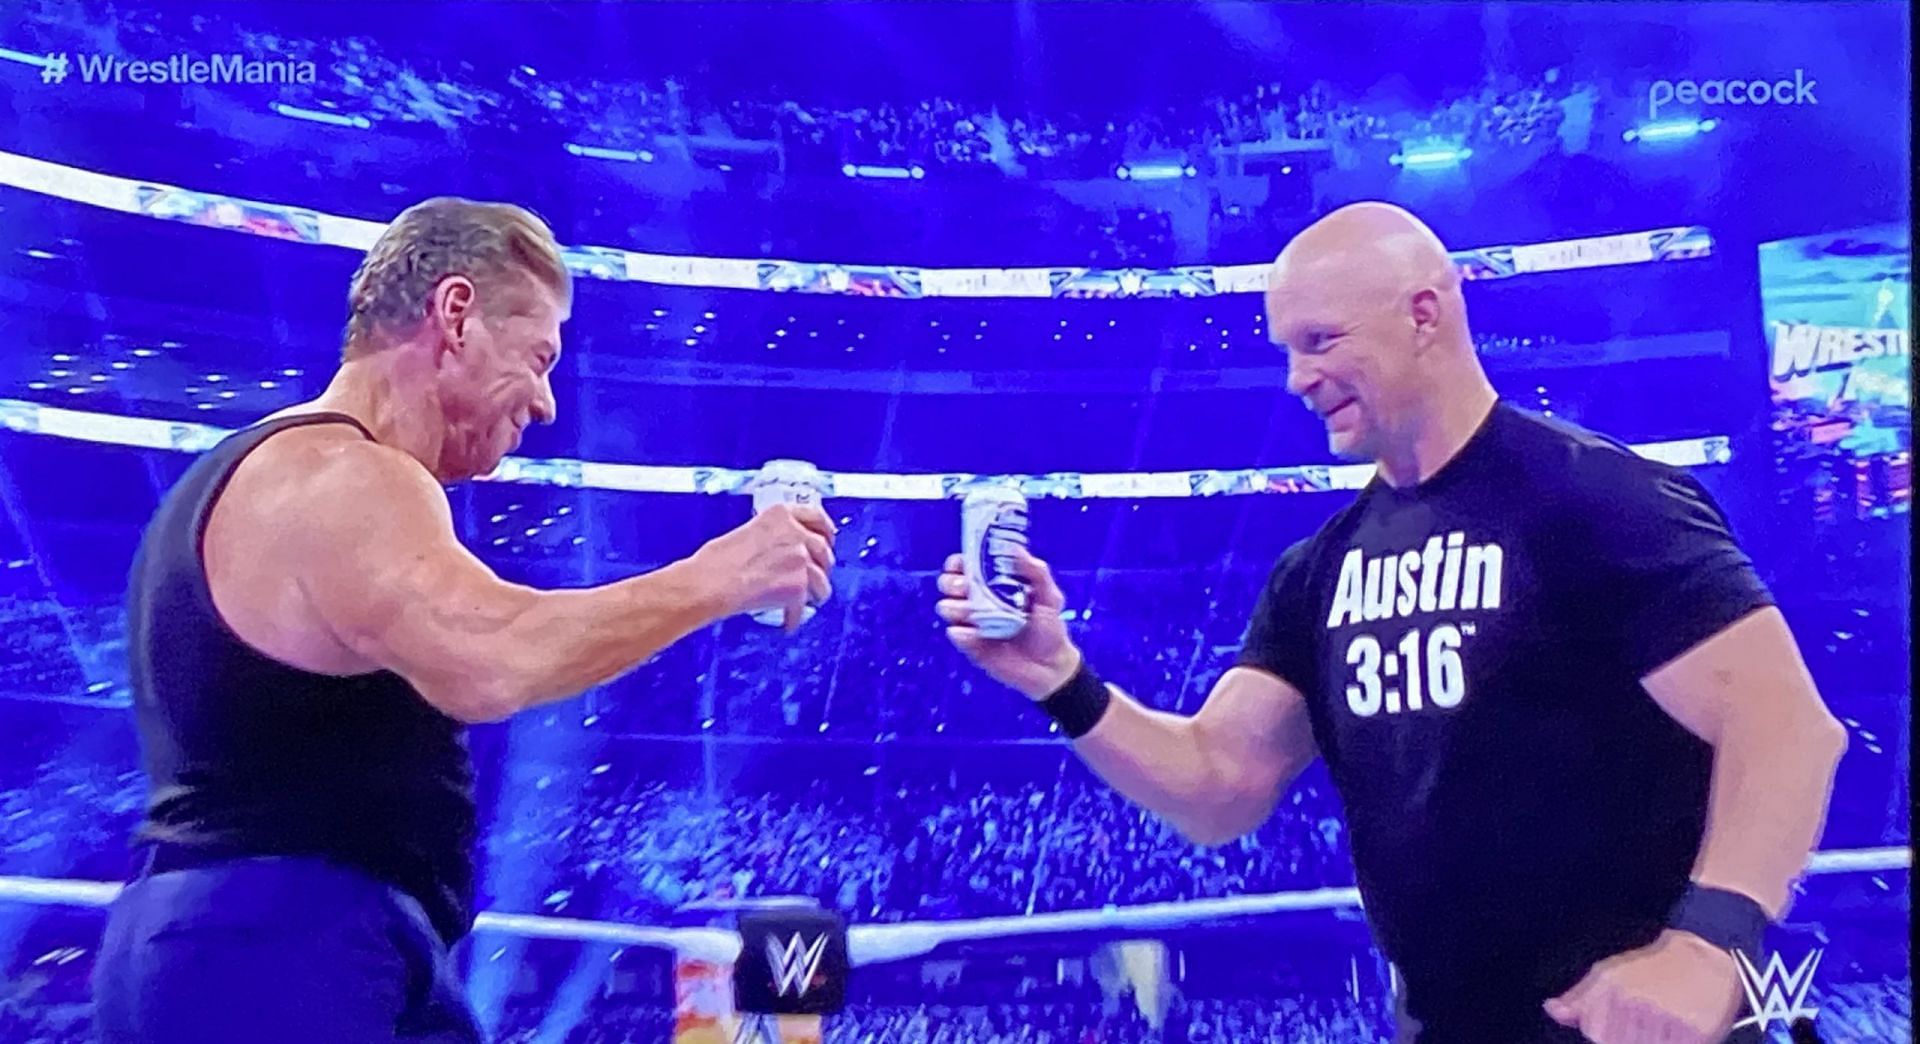 Vince McMahon took the worst Stone Cold Stunner in WWE history last night.